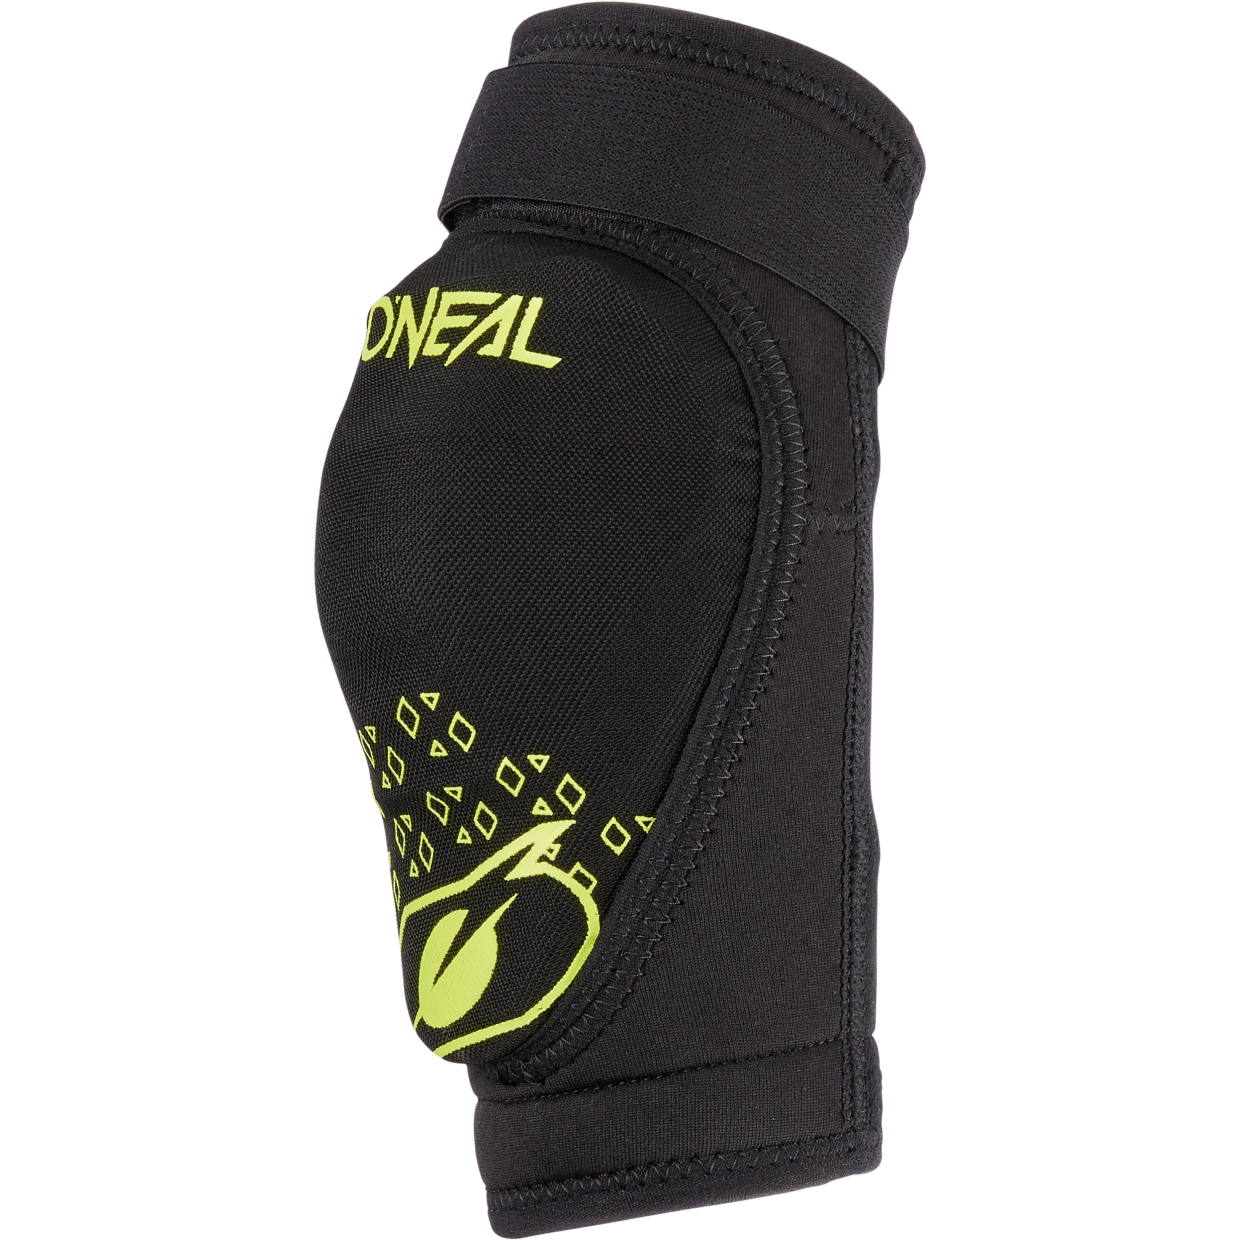 Image of O'Neal Dirt Youth Elbow Guard - V.23 black/neon yellow